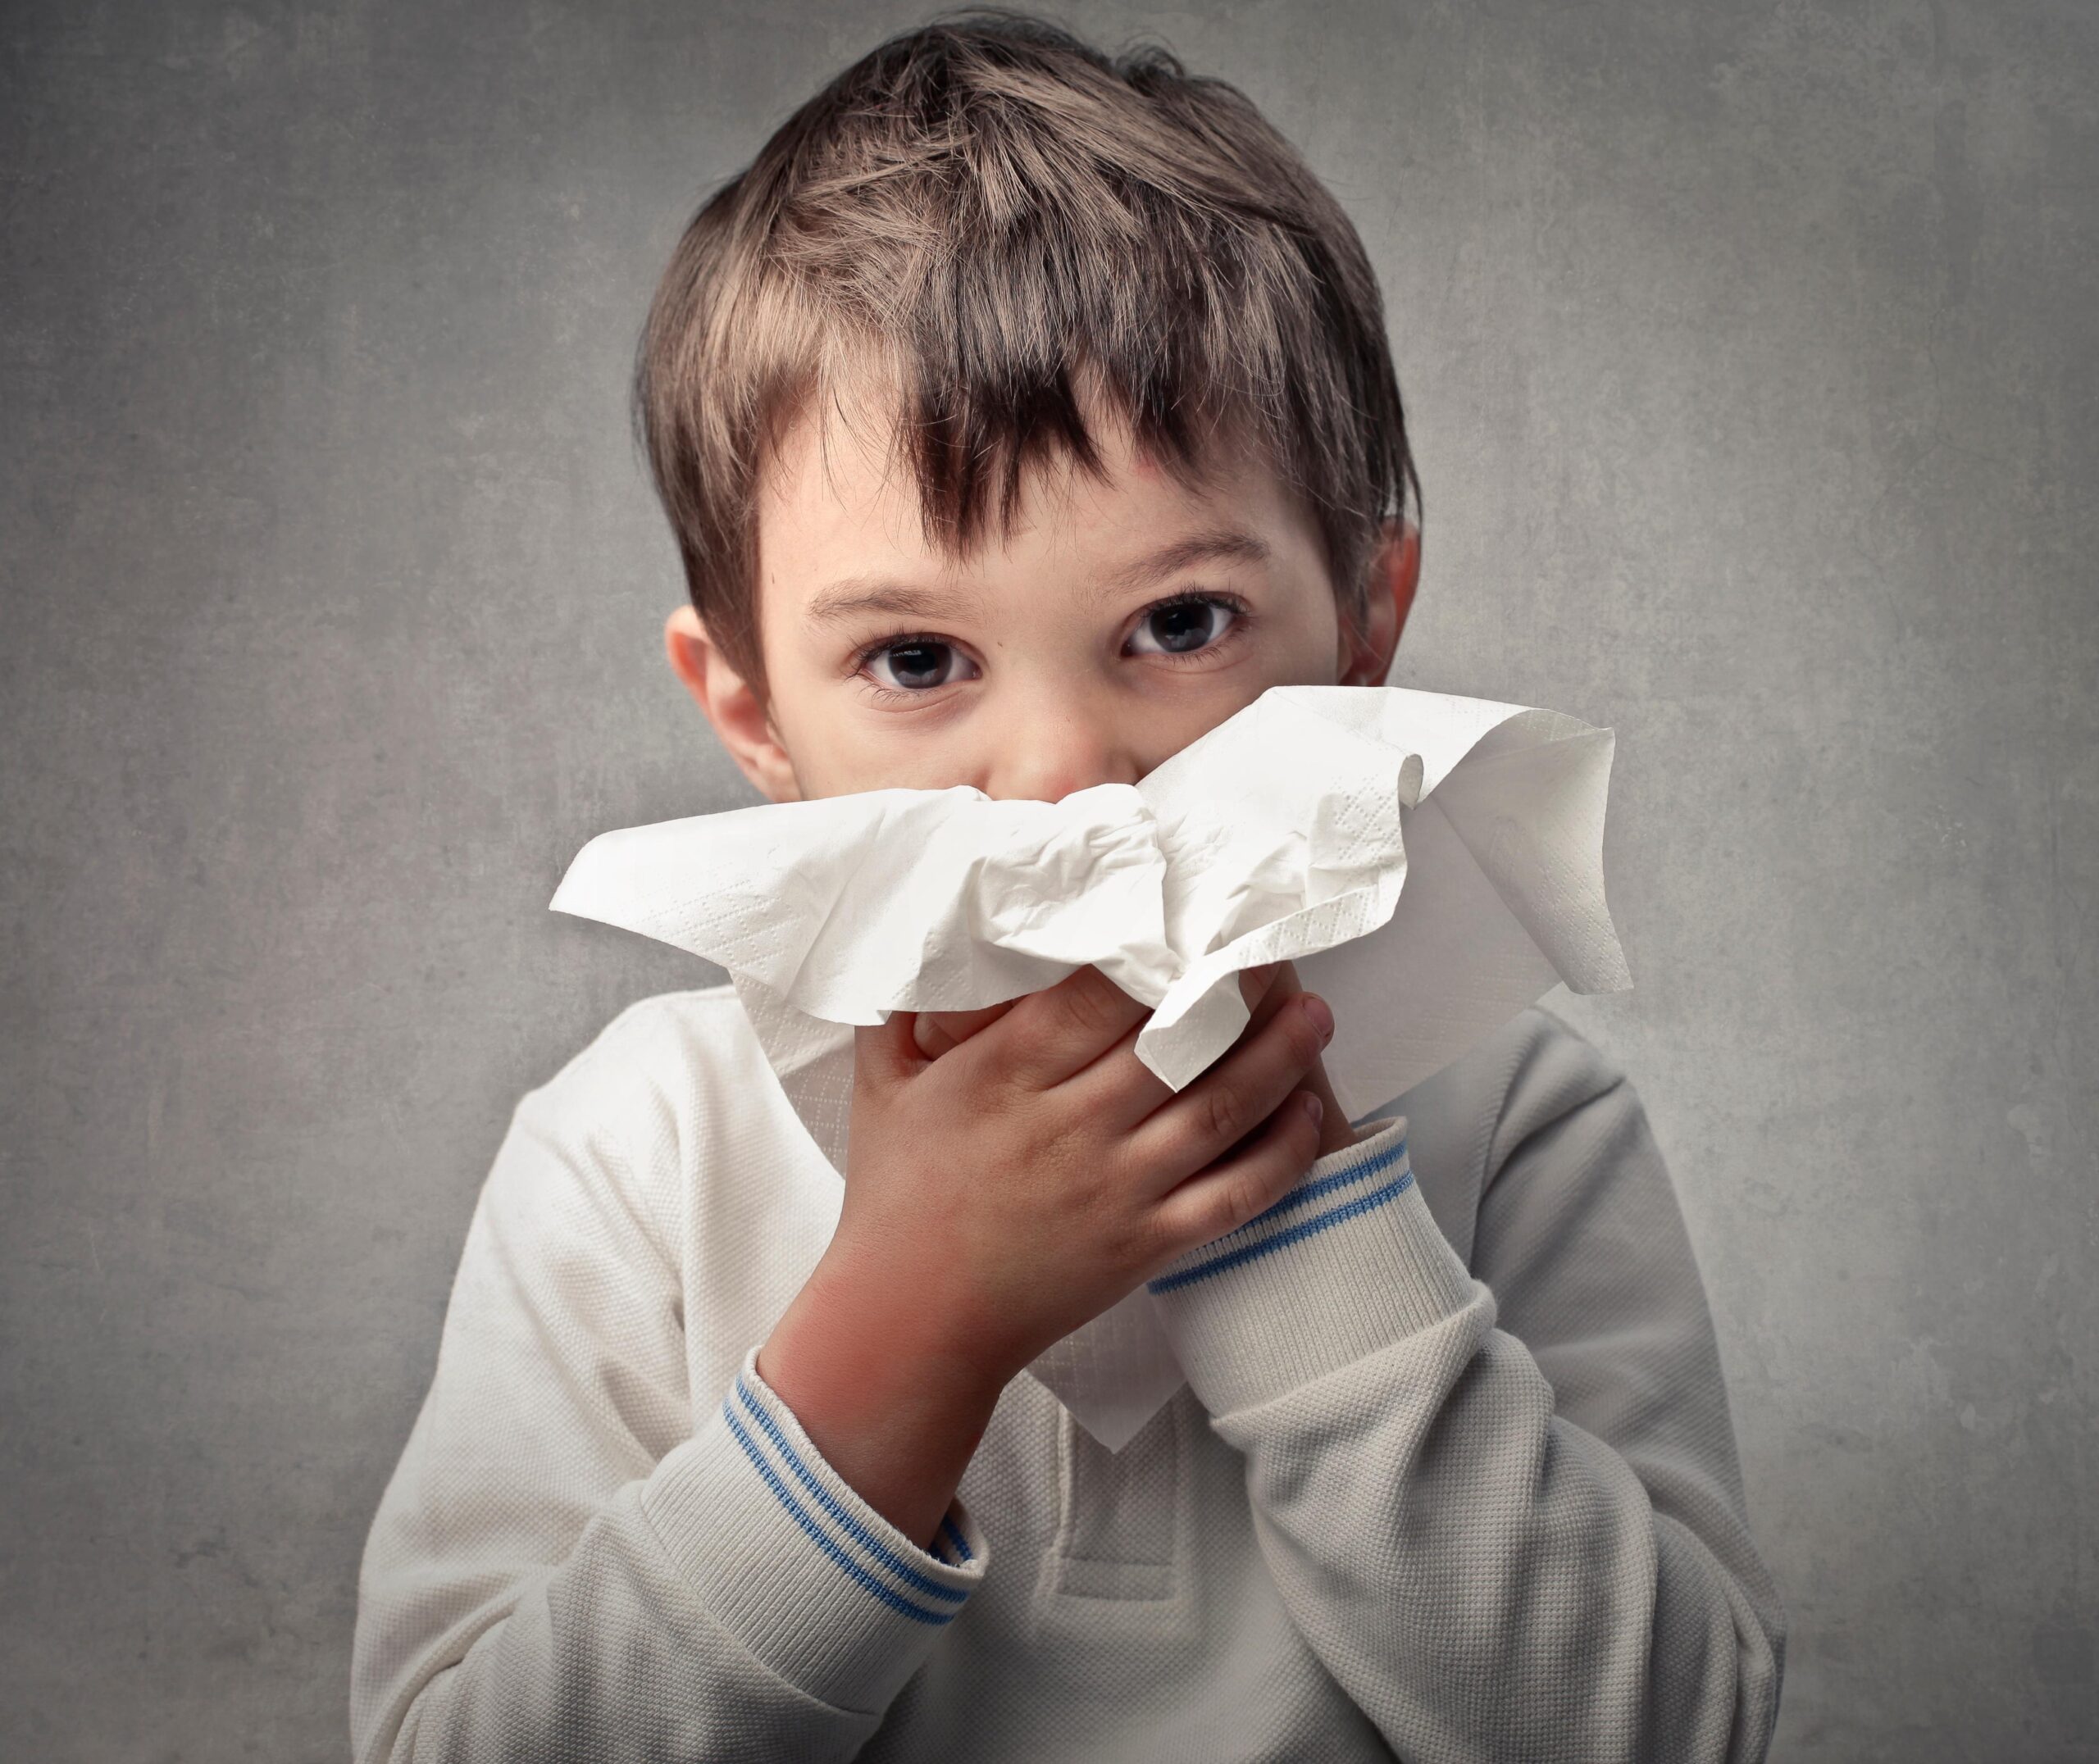 Treat Your Kid’s Cold or Flu without Medicine